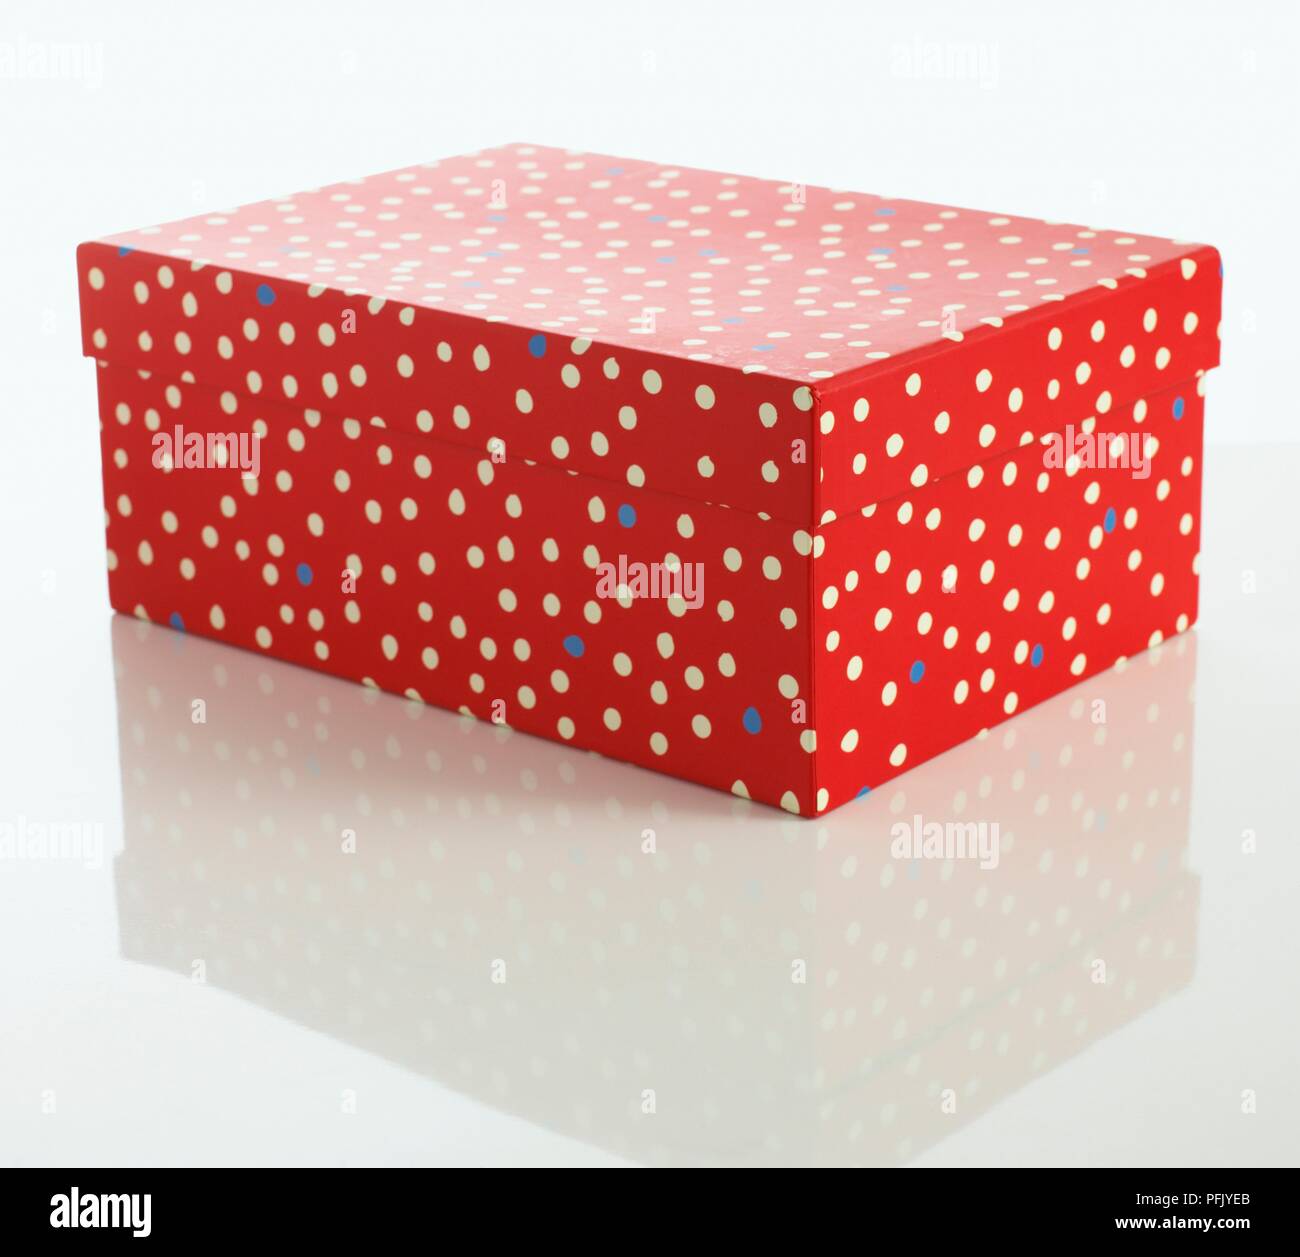 Red, spotted box with lid on Stock Photo